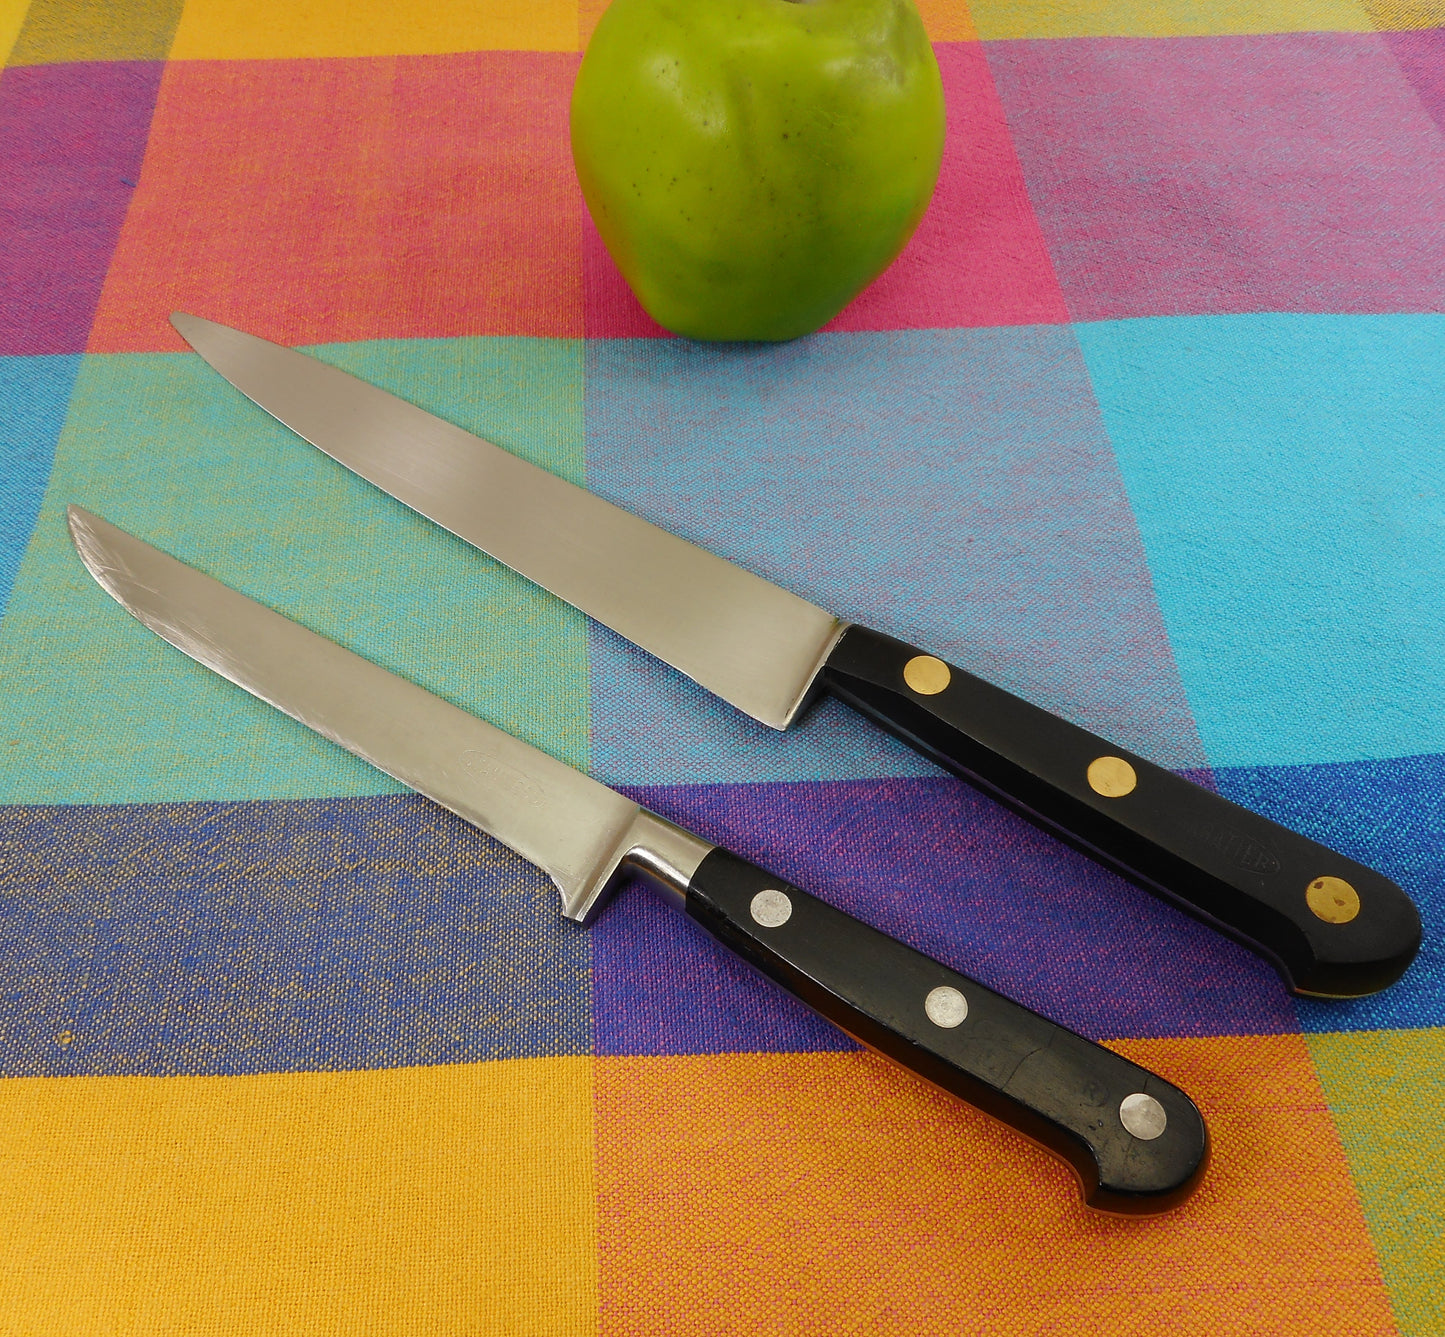 Sabatier France Pair Stainless Kitchen Knives wt Damage - 6" Utility & Lion 7.5" Slicing